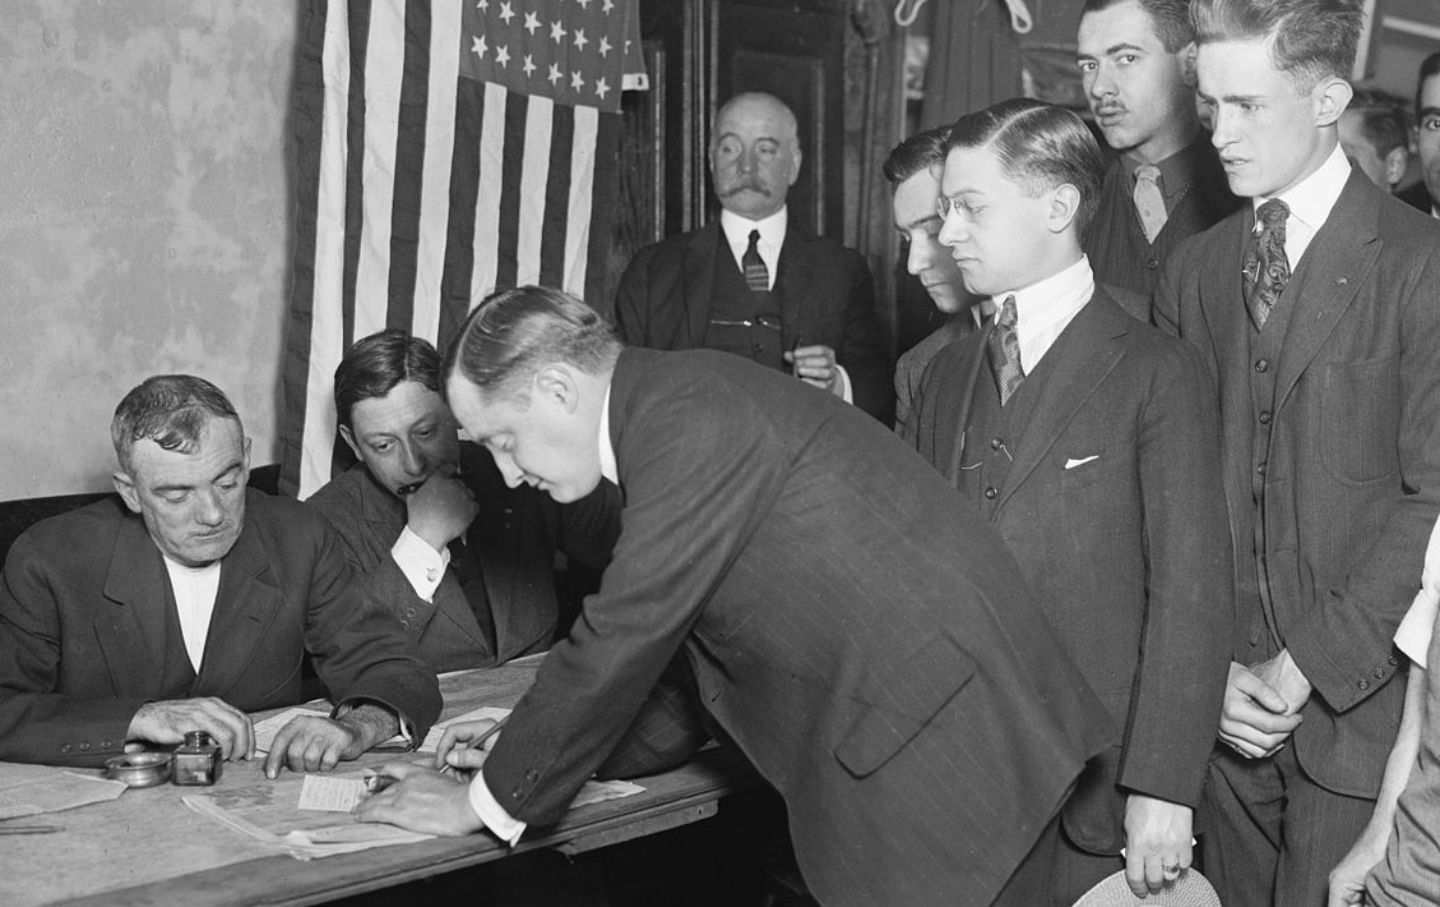 May 18, 1917: Congress Passes the Selective Service Act, Instituting a Mandatory Military Draft